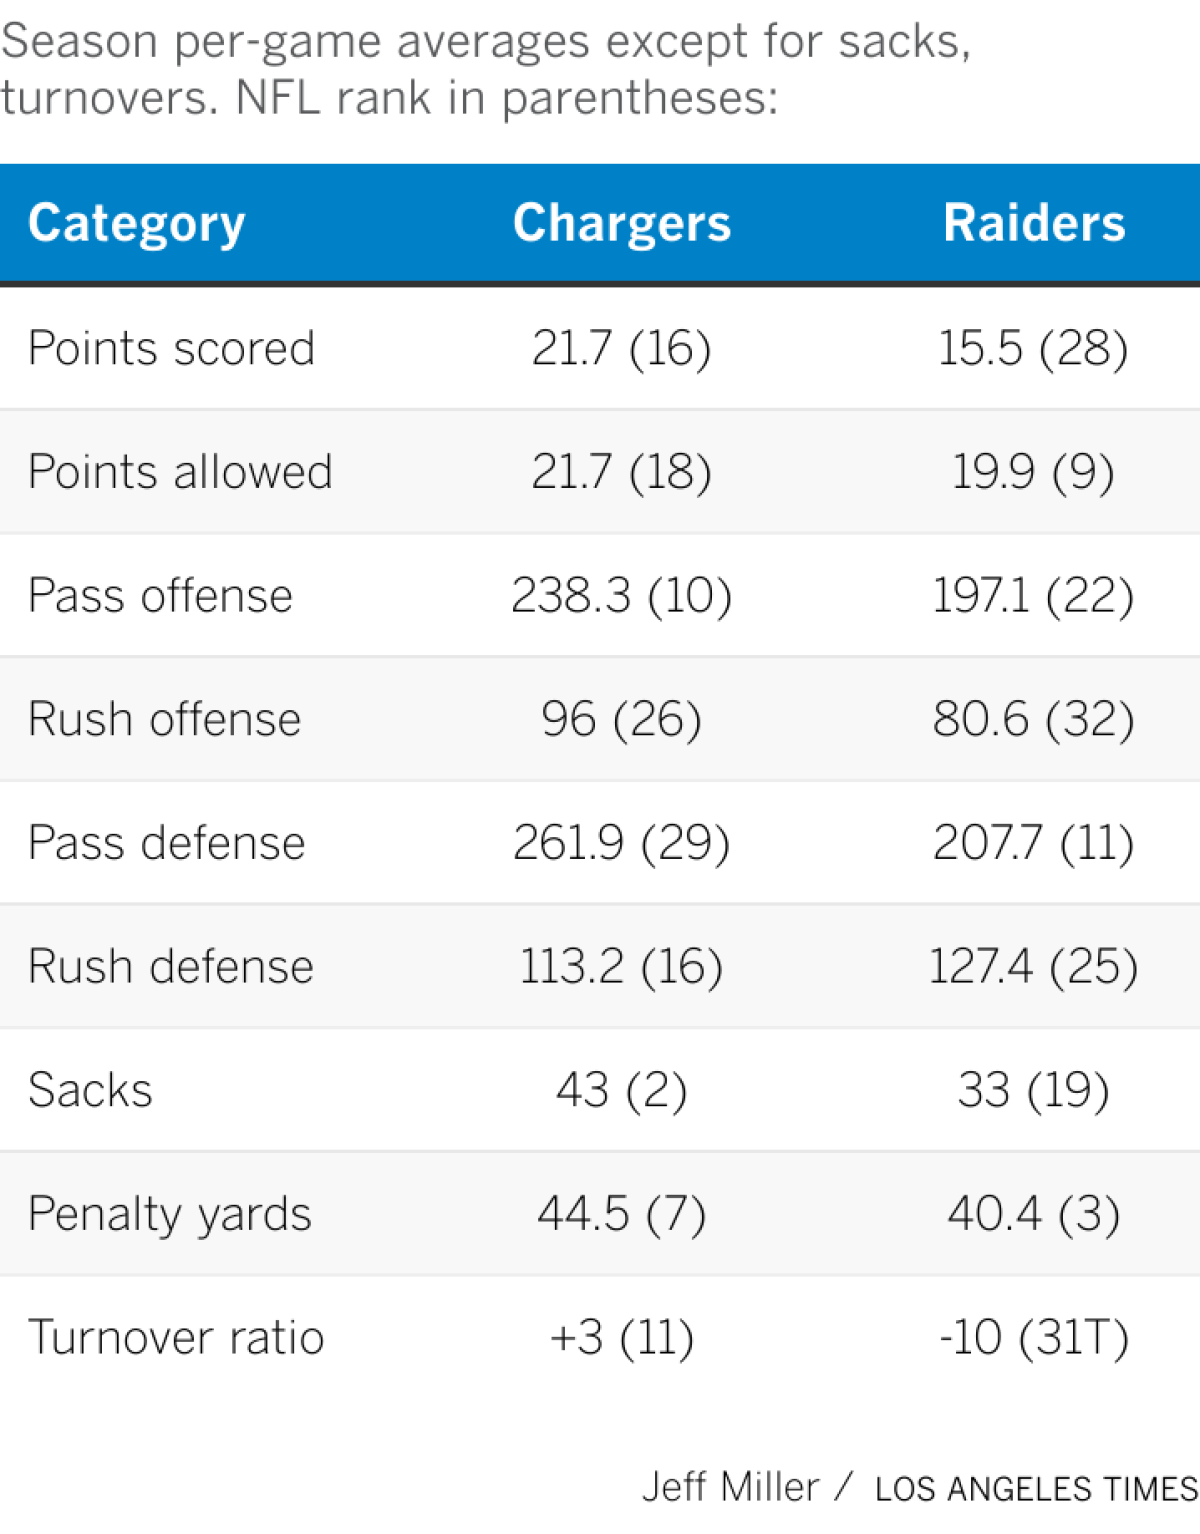 A chart comparing season stats for the Chargers and Raiders.